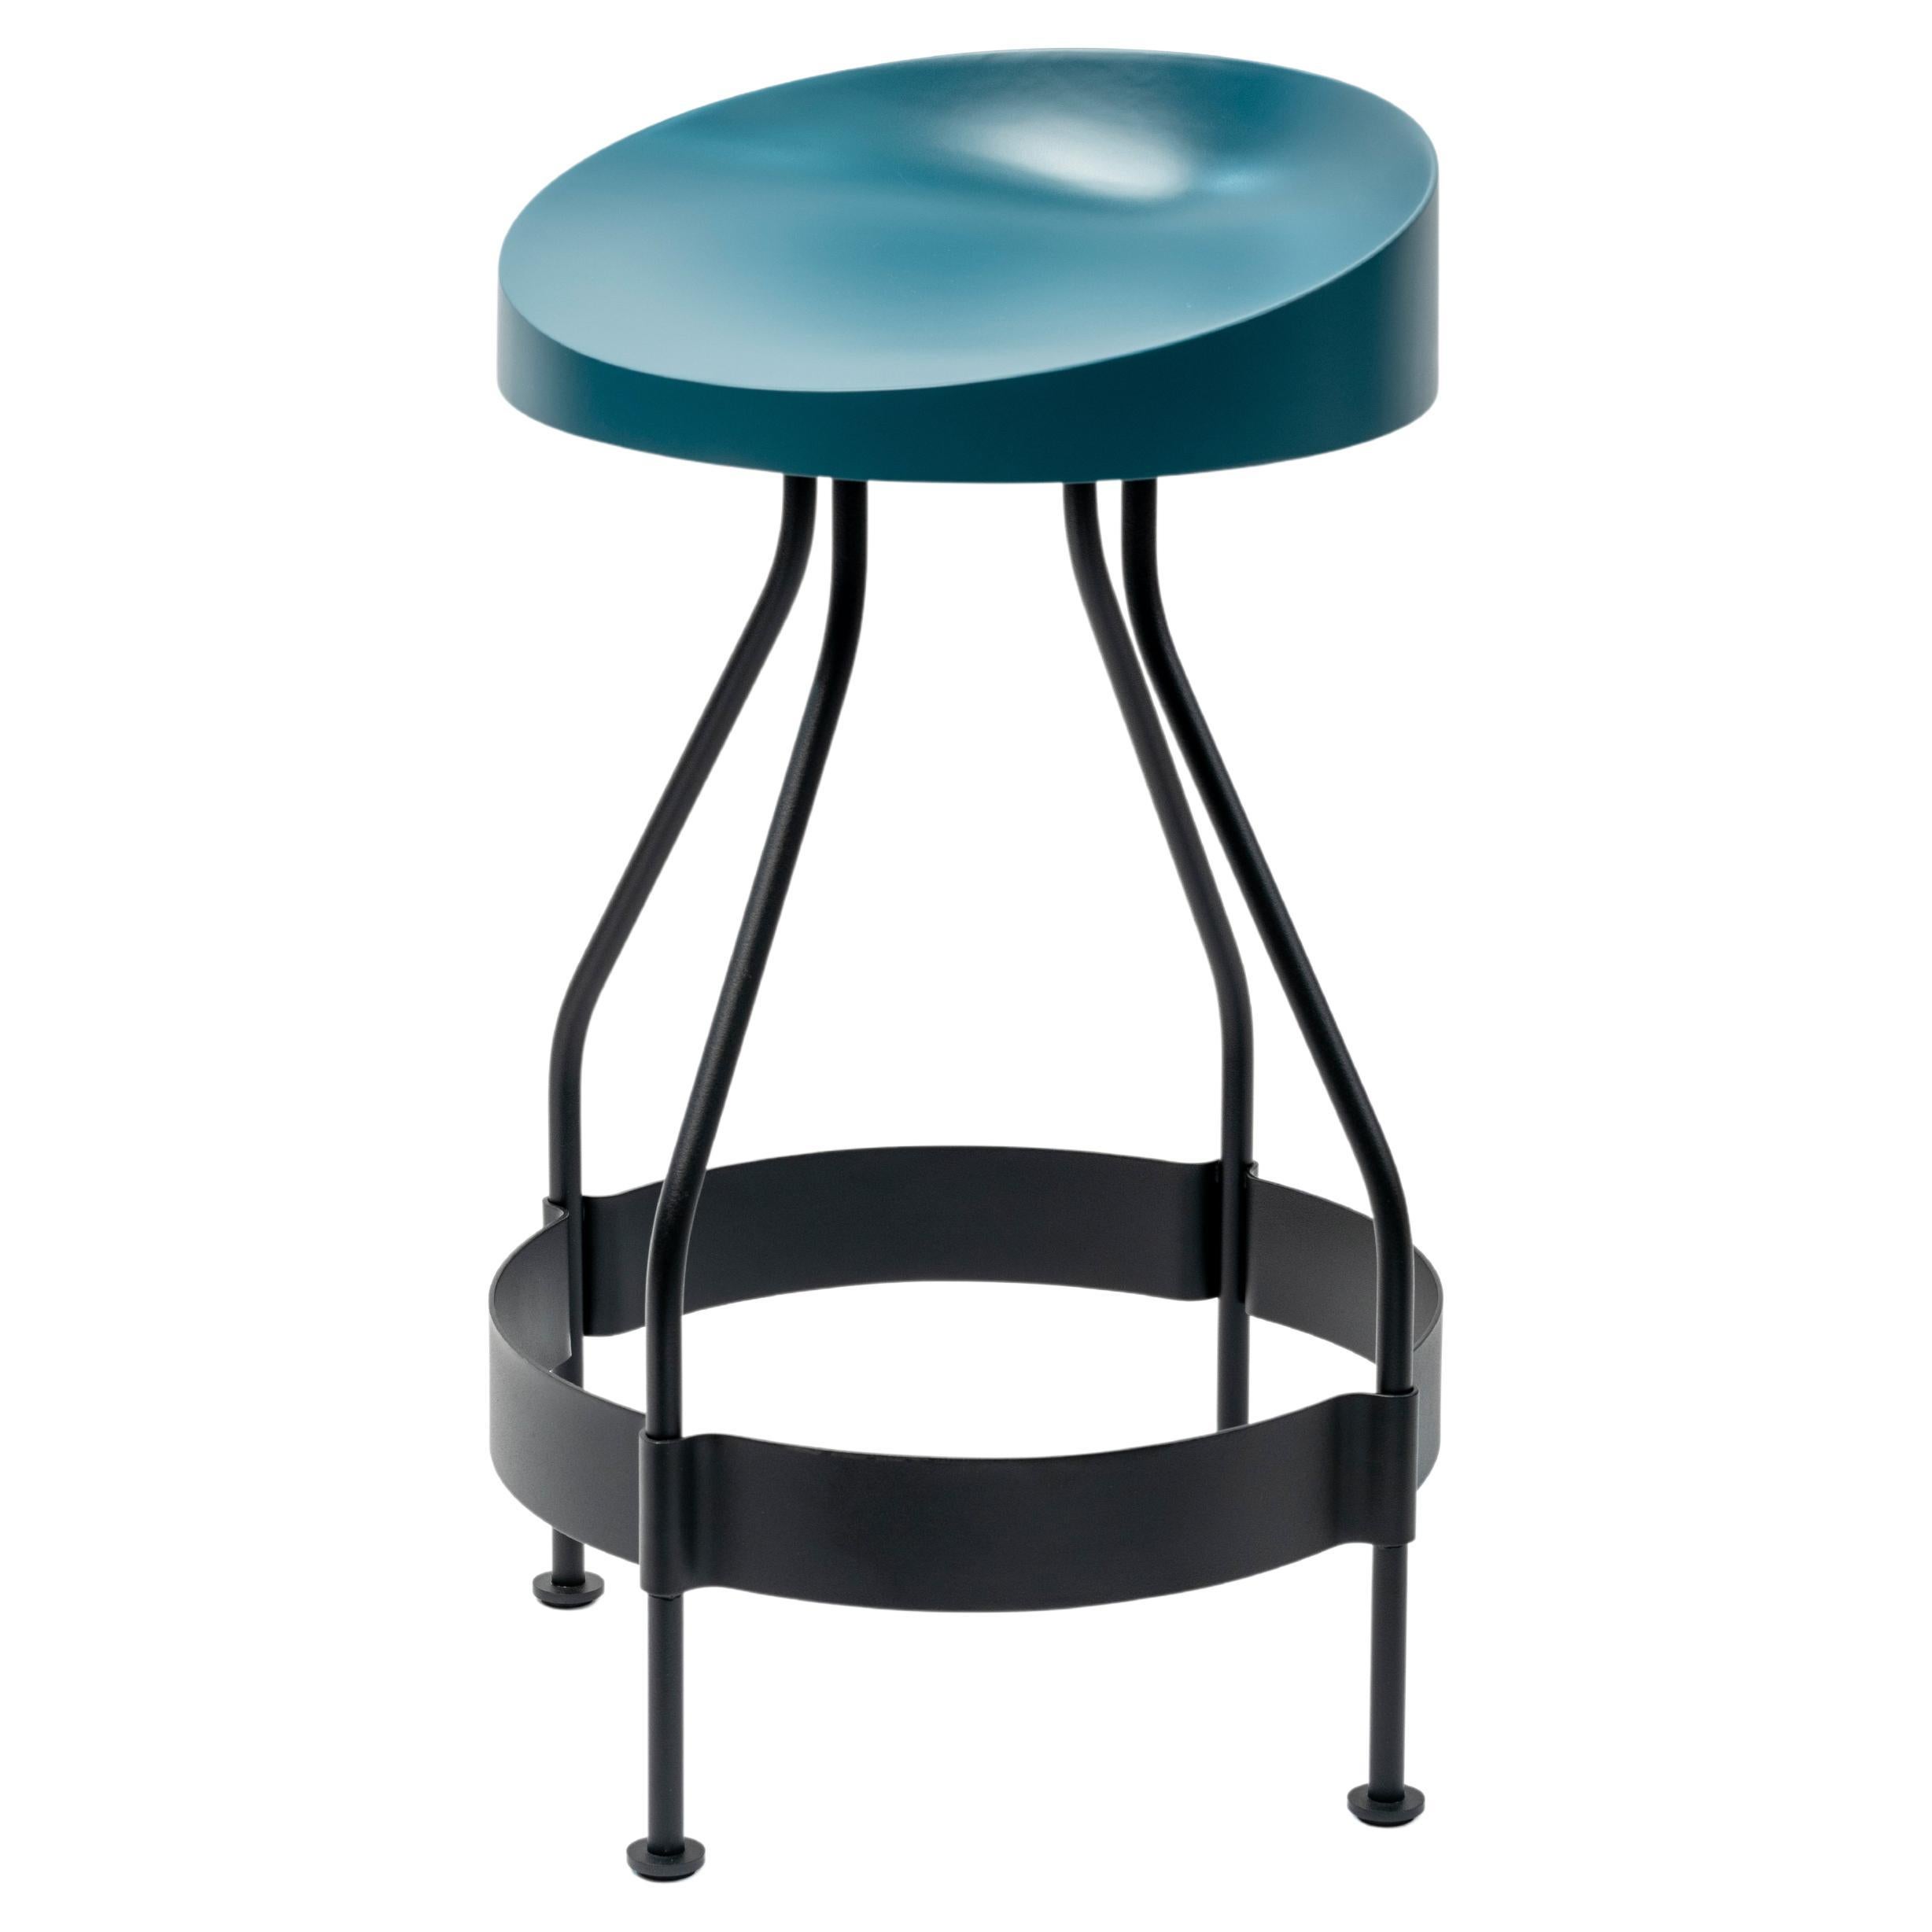 La Manufacture-Paris Olindias Swivel Stool IN OR OUTDOOR by Luca Nichetto